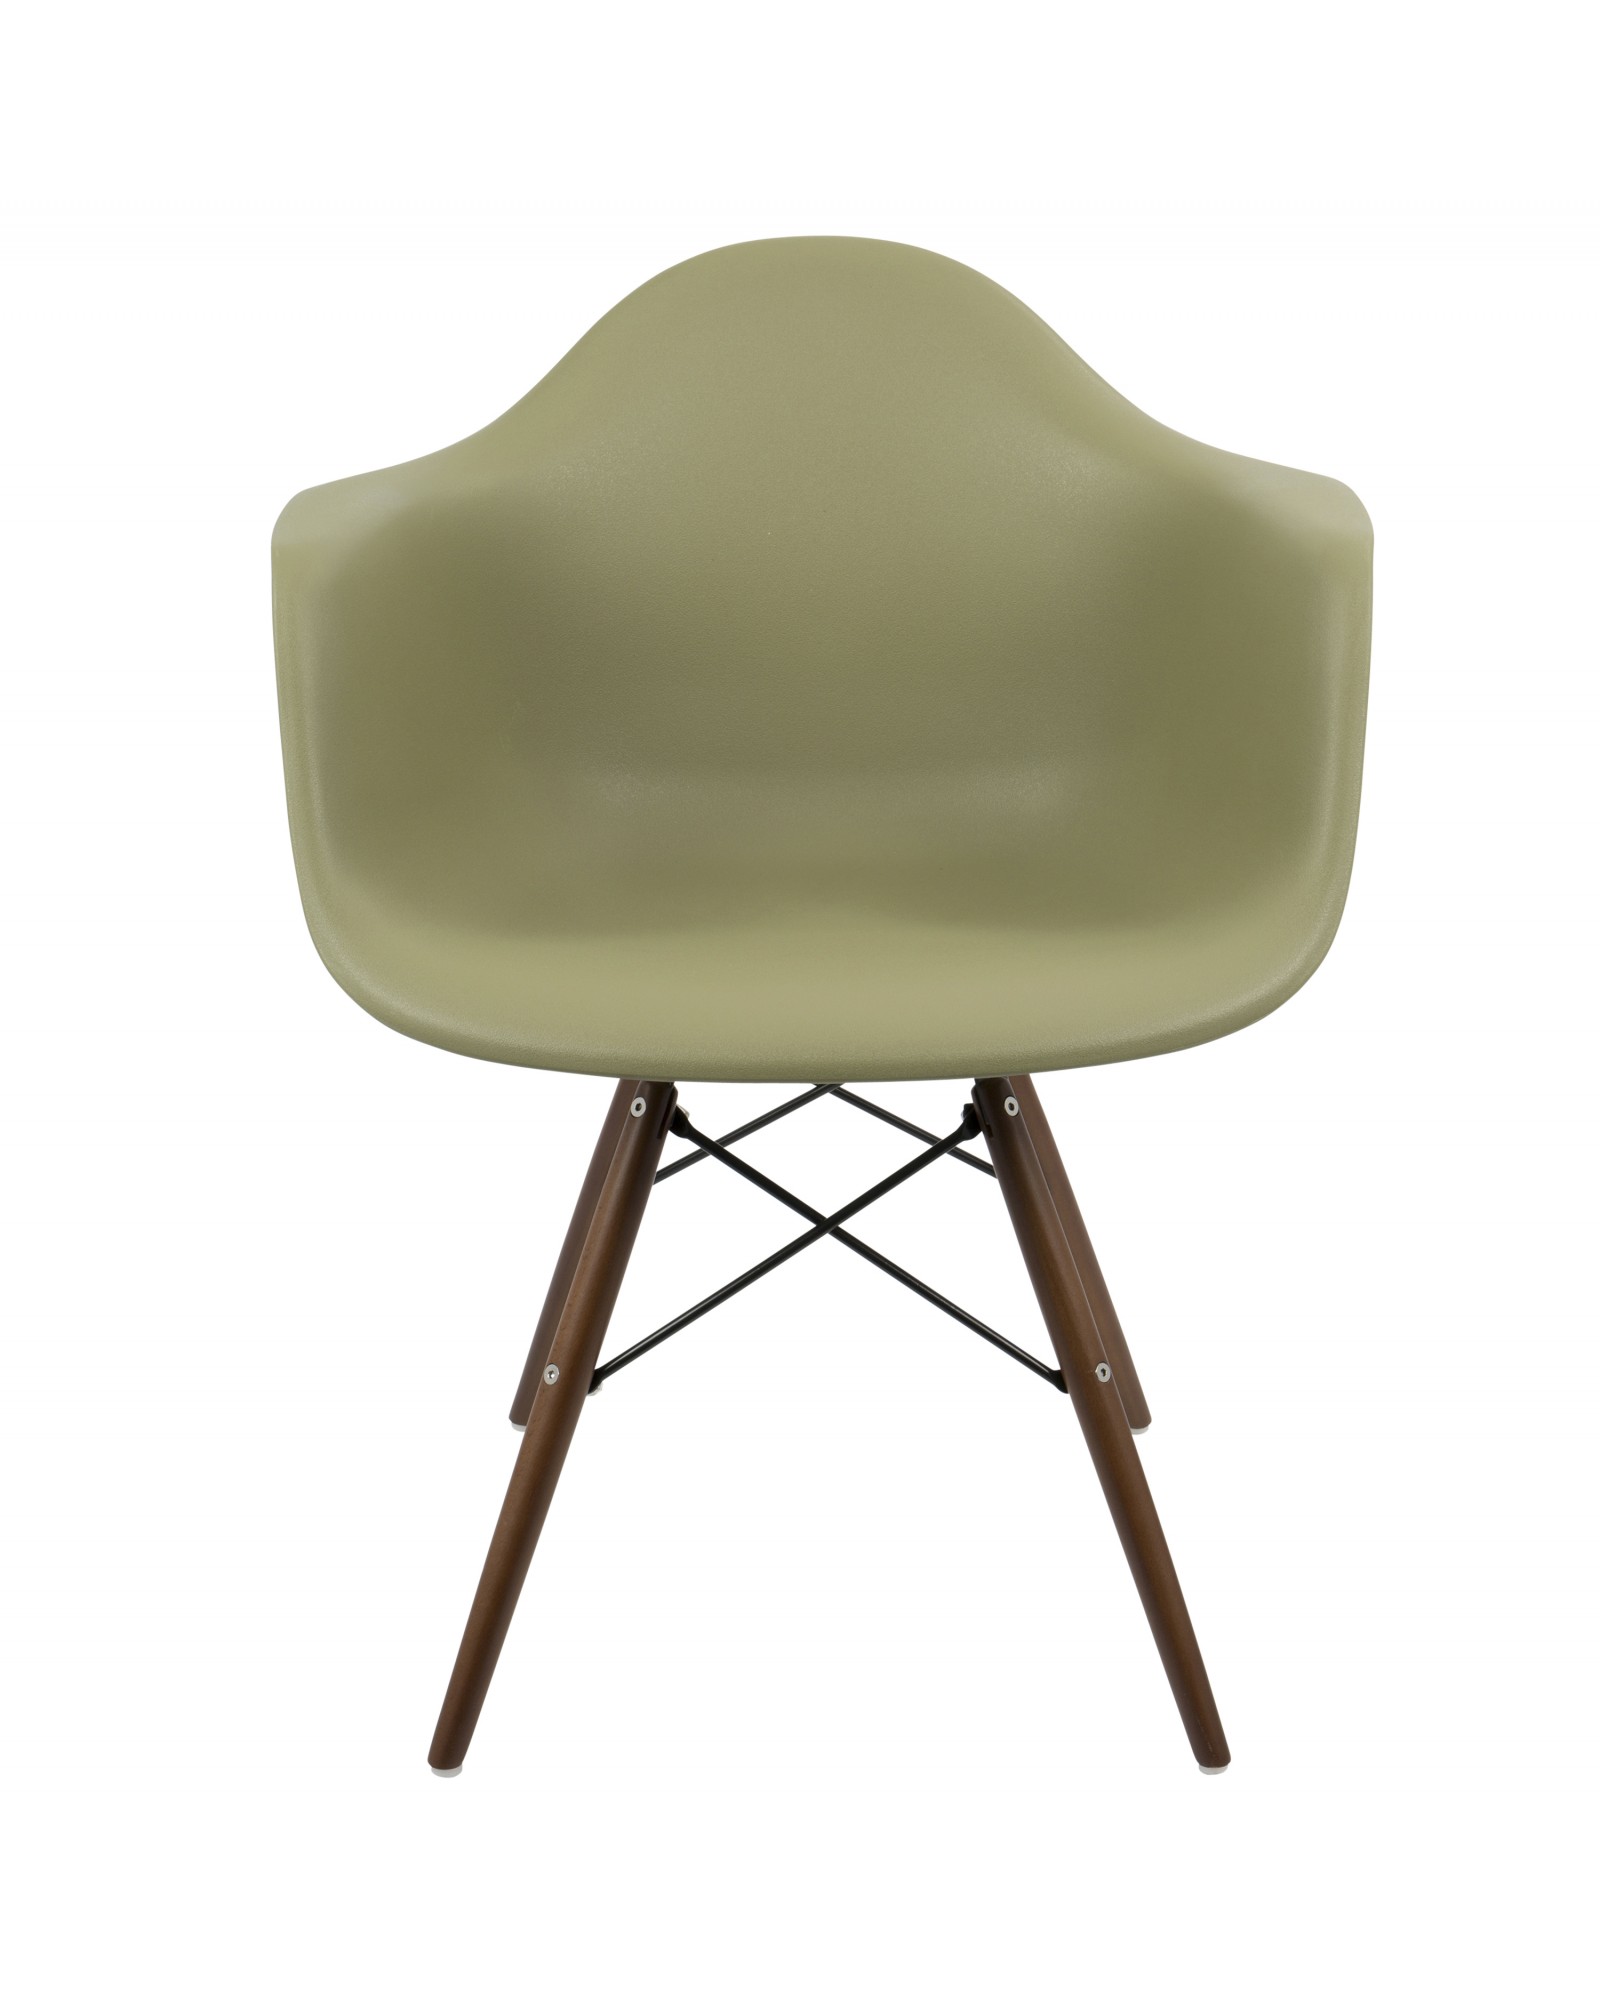 Neo Flair Mid-Century Modern Chair in Olive and Espresso - Set of 2